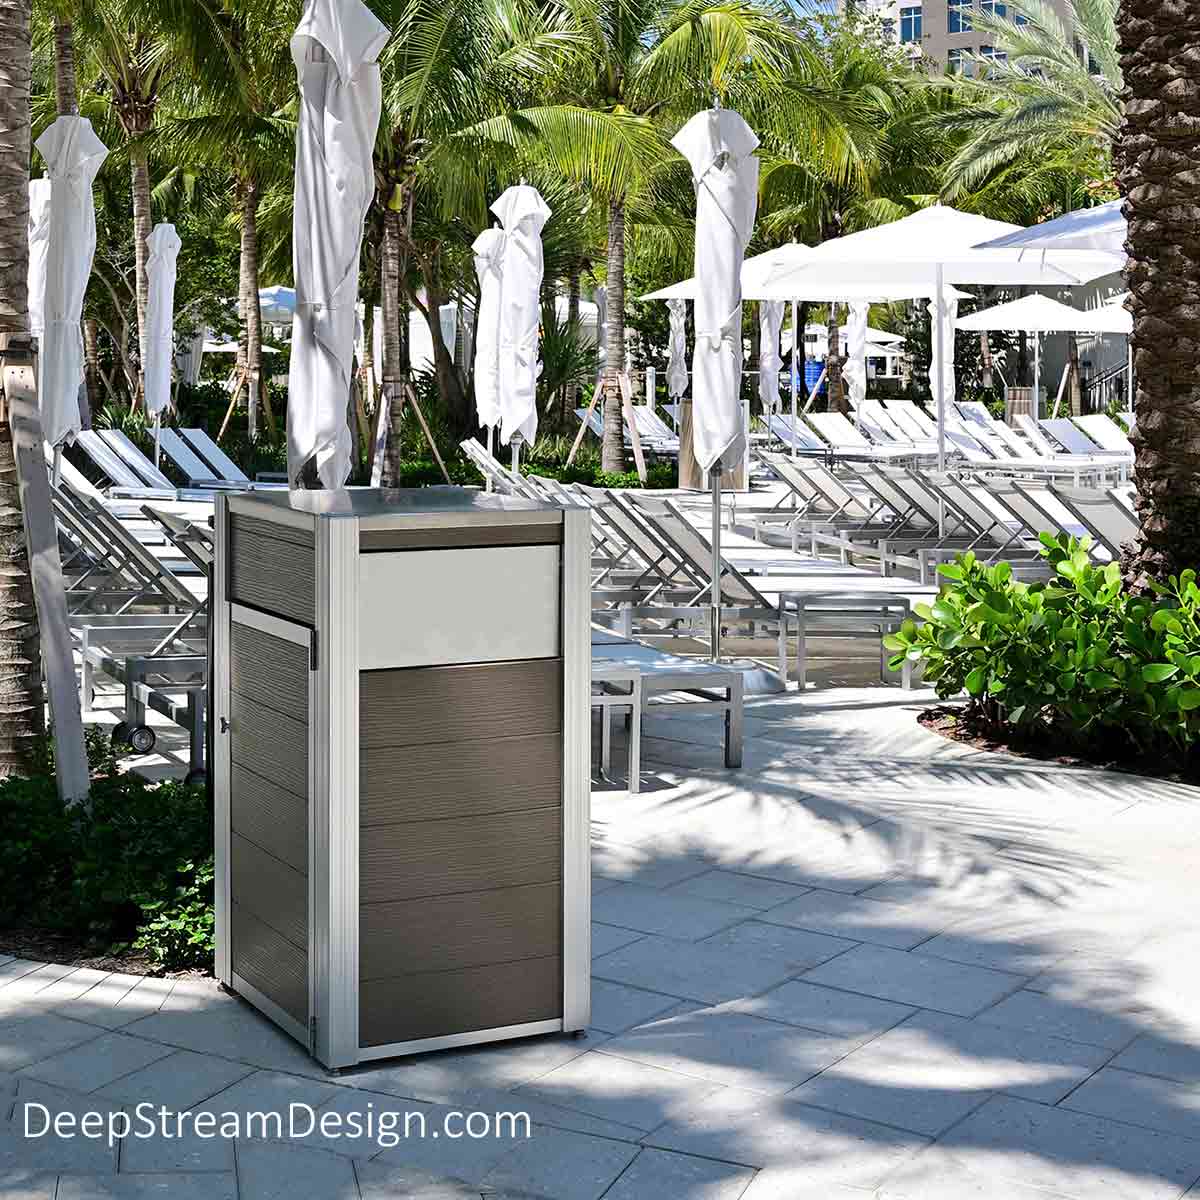 A 5-star resort's tropical waterpark with private cabanas and rows and rows of sunbeds around one of the many lazy rivers and tropical pools uses DeepStream’s weatherproof, maintenance-free, high-volume Oahu Modern Commercial Recycling and Trash Bins crafted with Aged Hardwood recycled plastic lumber, 316 stainless steel lid and hinges, ergonomic side door for bag changes, and marine aluminum push flaps to withstand both the weather and the hundreds of thousands of visitor touches every year, while maintaining their like-new appearance.